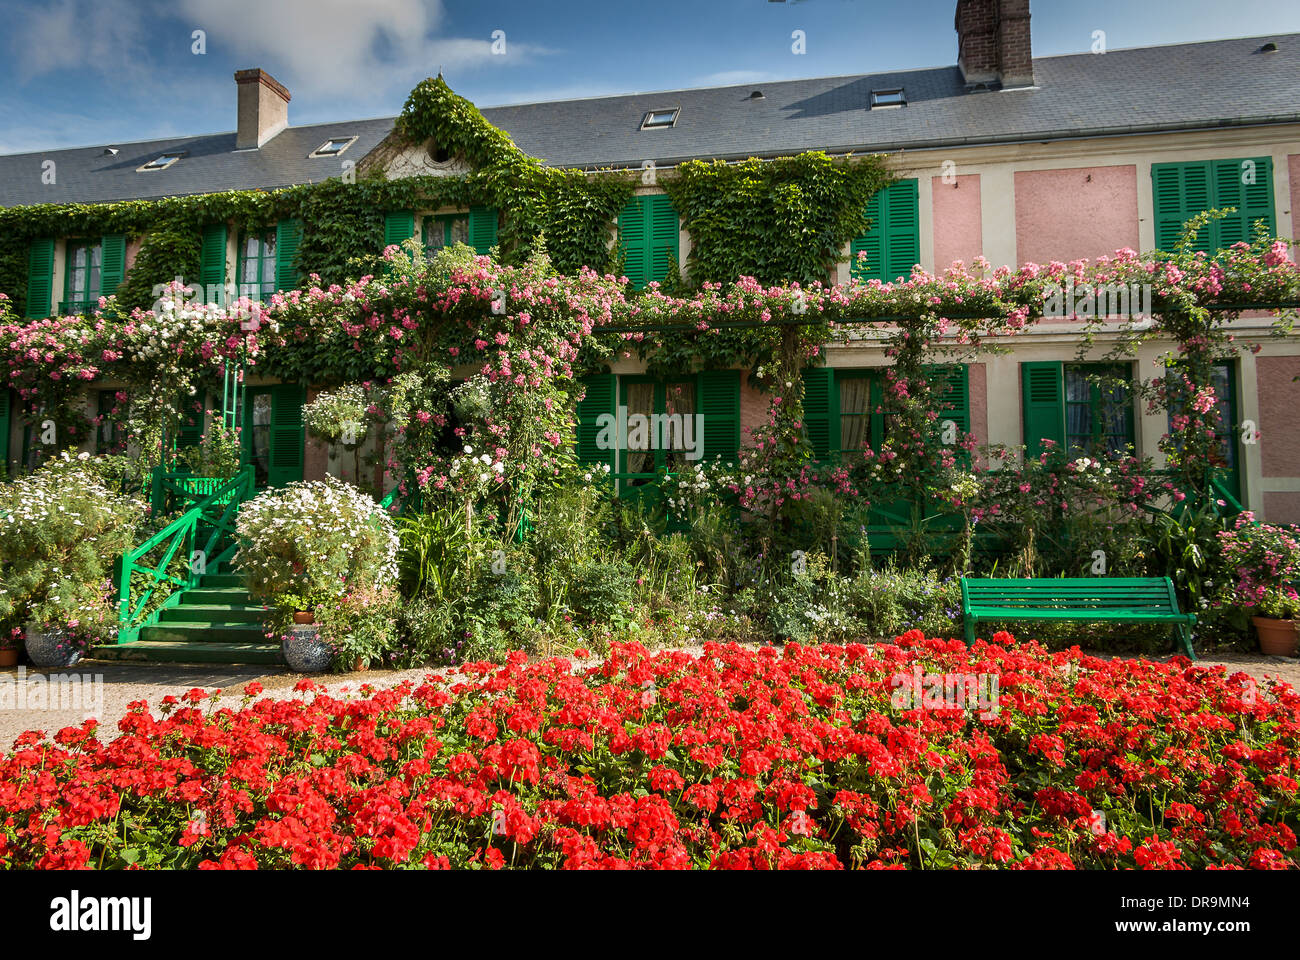 Monet's house and garden in Giverny France EU Stock Photo